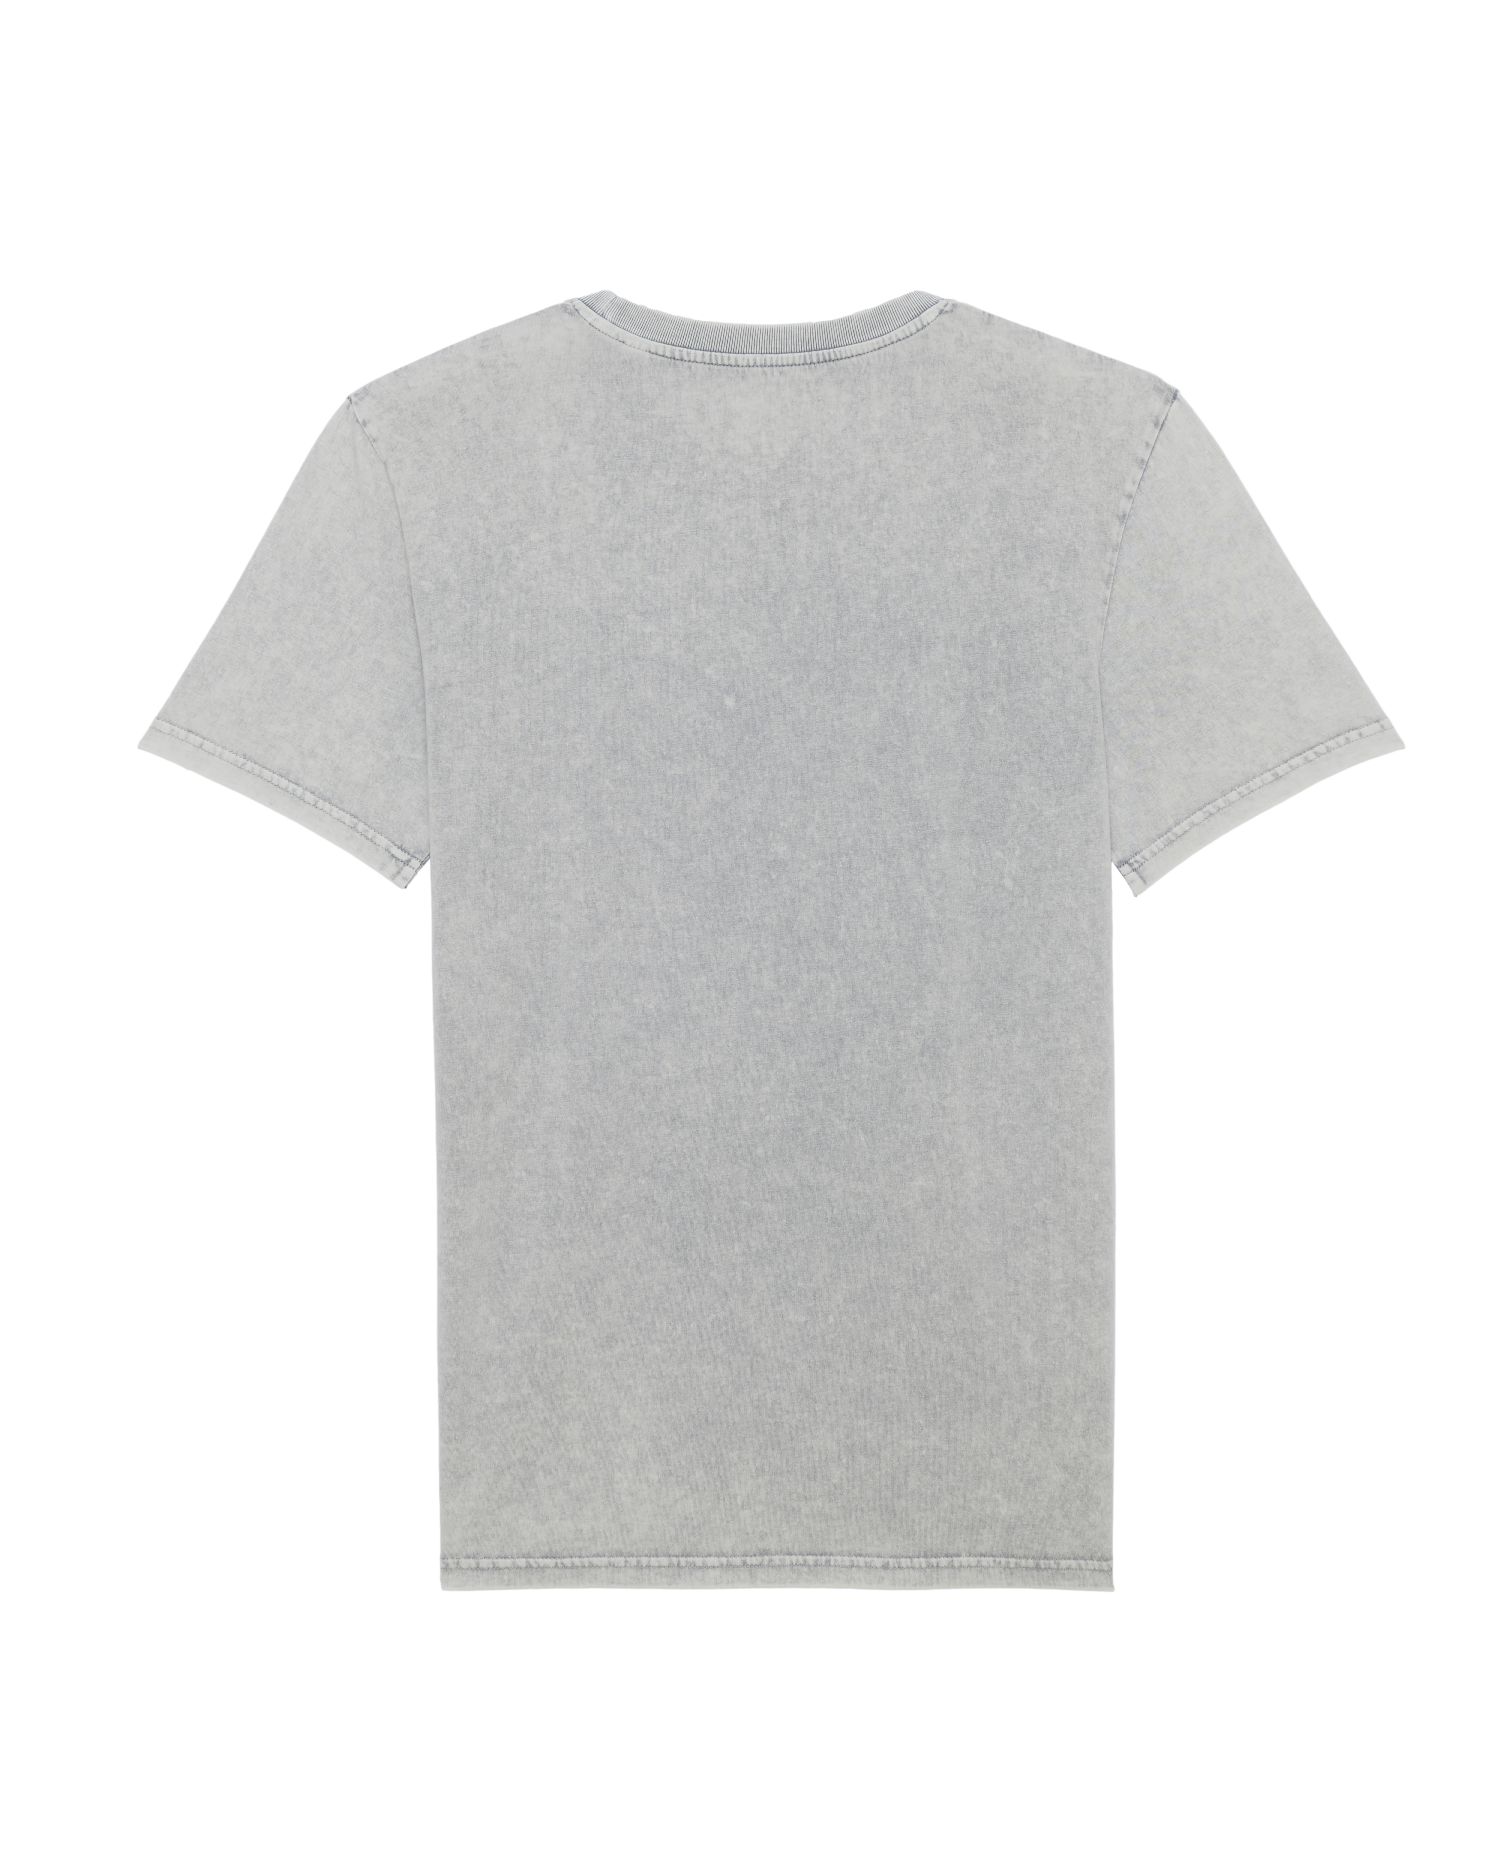 T-Shirt Creator Vintage in Farbe G. Dyed Aged Light Grey